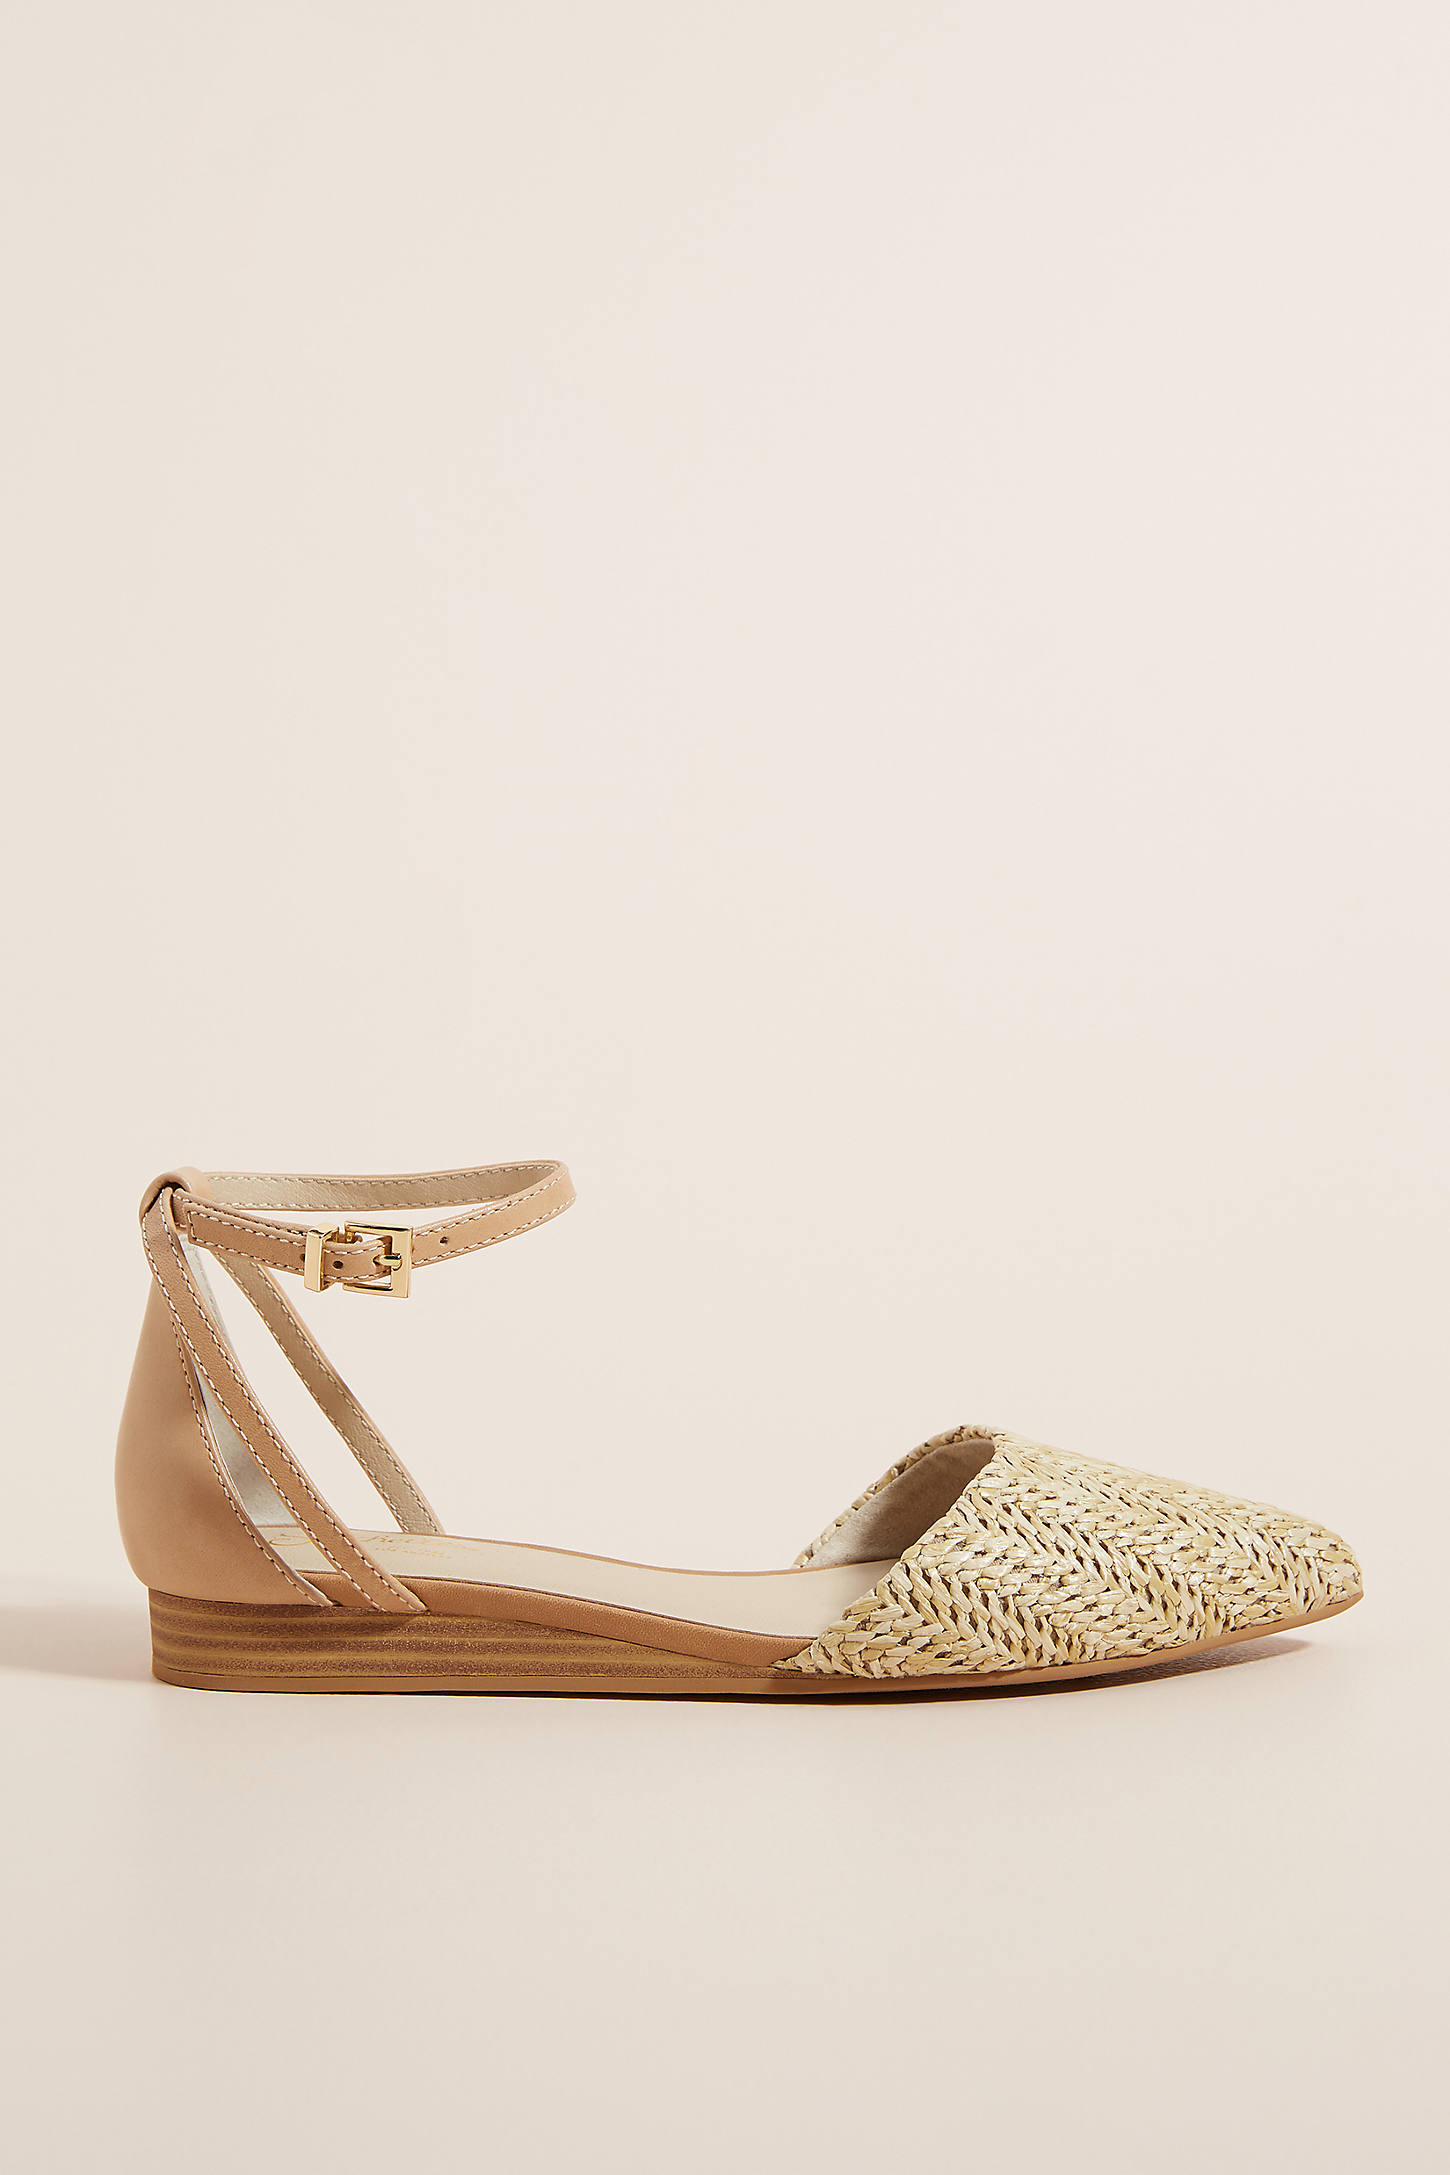 Seychelles Ankle Strap Flats In Beige